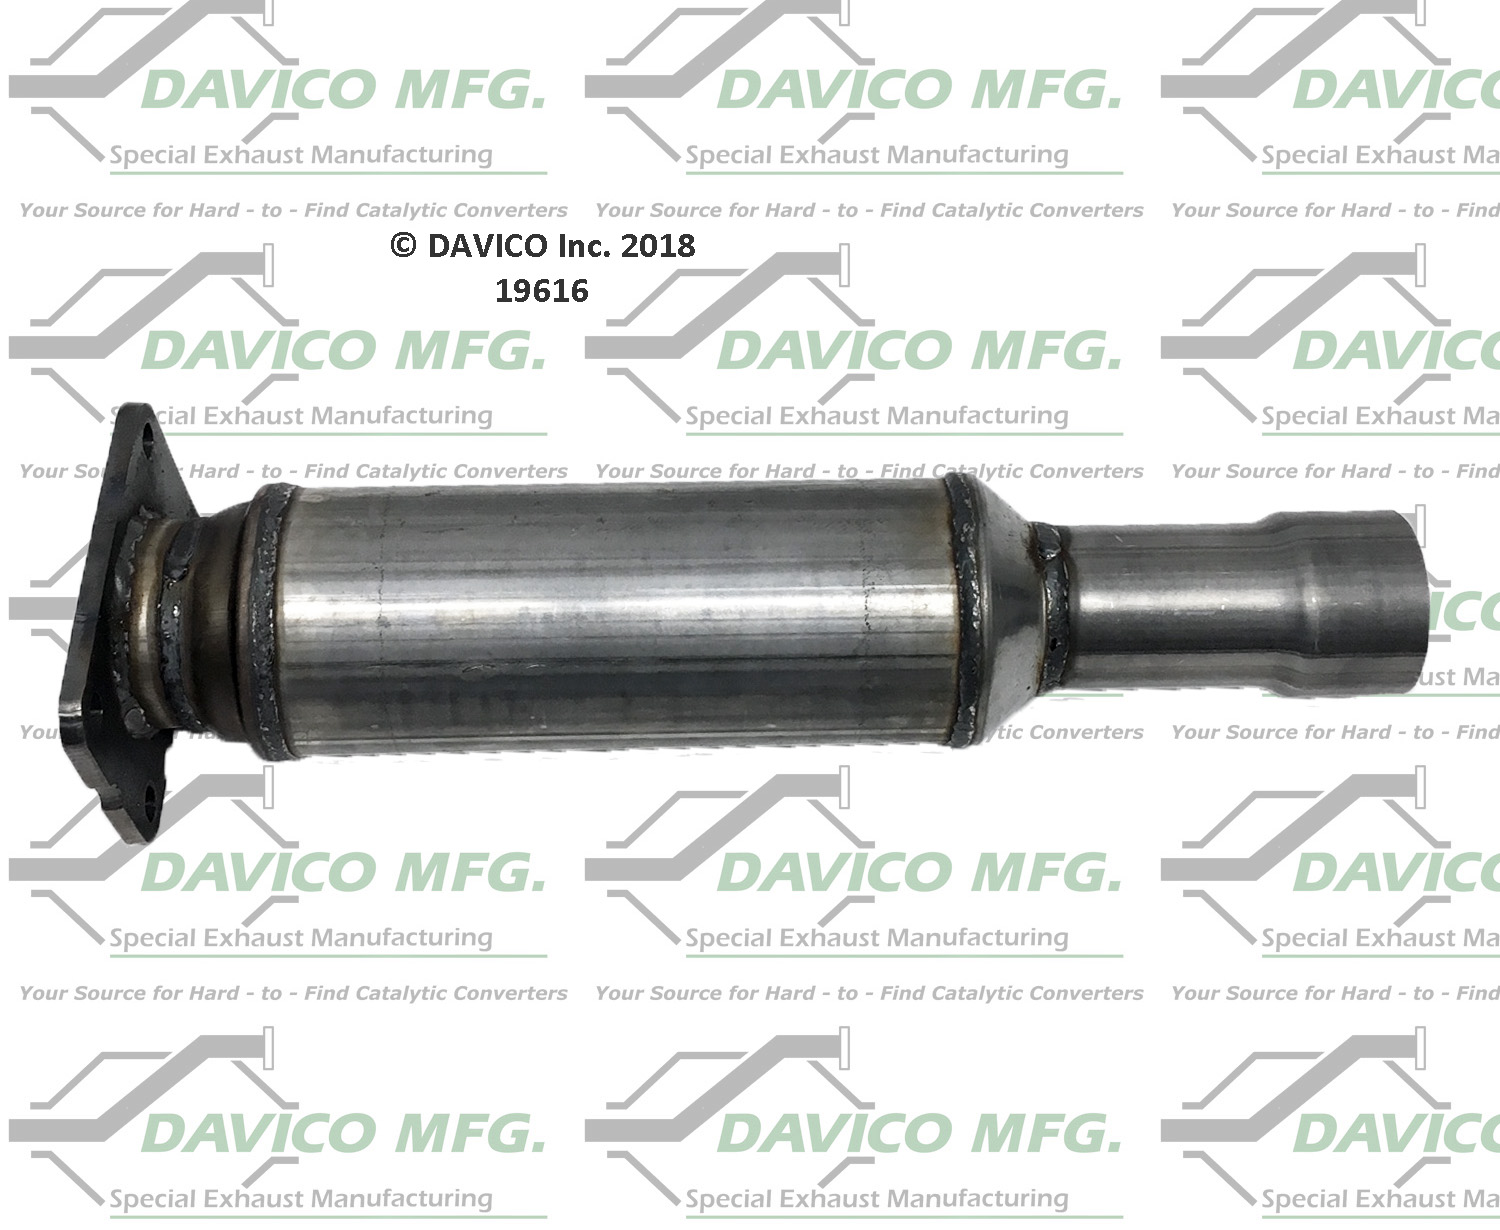 2006-2011 Buick Lucerne - Cadillac DTS 2000-2005 Cadillac DeVille - Seville 8 Cyl. 4.6L Rear Main Converter